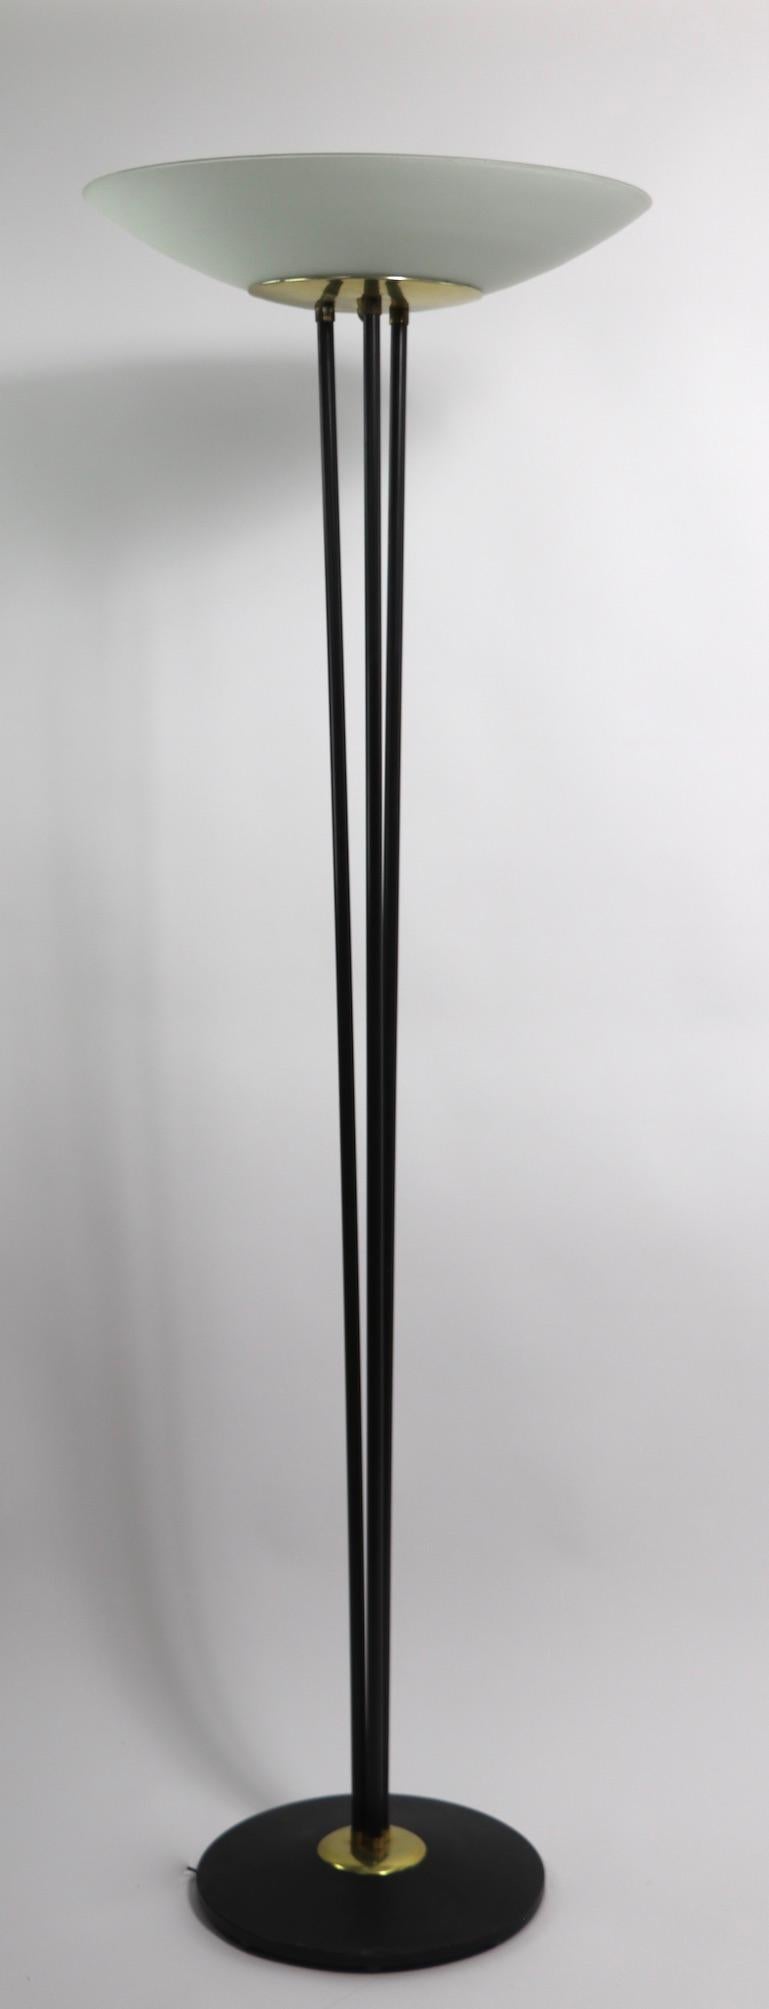 Classic mid century  torchiere floor lamp, designed by Gerald Thurston, for Lightolier. This stunning lamp features a black base from which emanate three rods that splay out and support a brass dish that holds the original glass dish shade. The